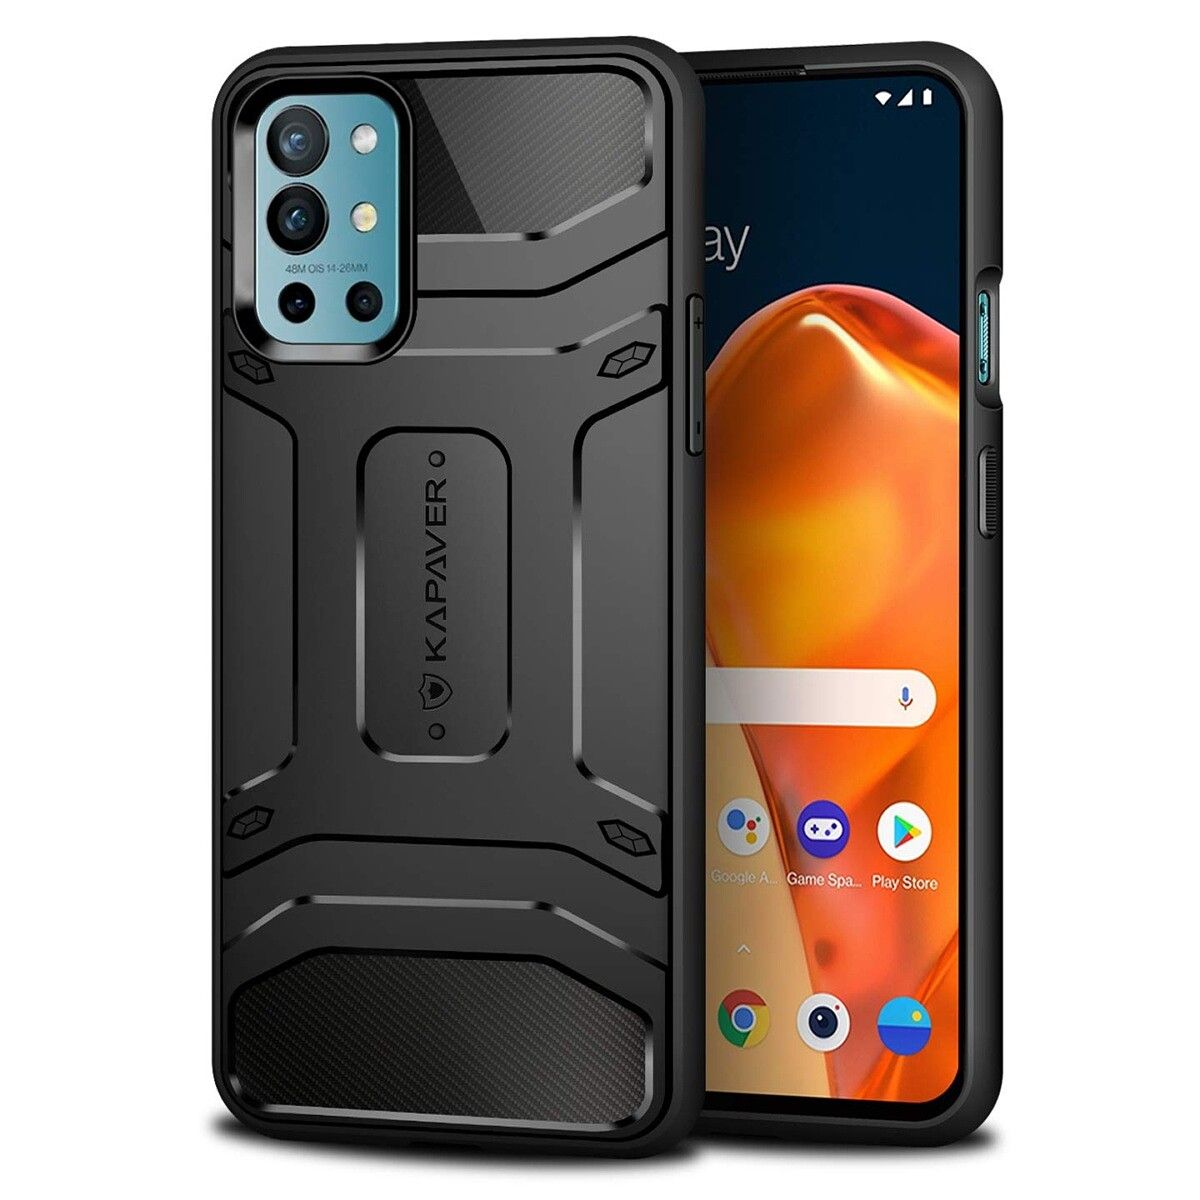 Is Butterfingers your middle name? Don't worry, the KAPAVER rugged case for OnePlus 9R is designed to protect your phone against drops. It also offers a good grip when holding the phone.